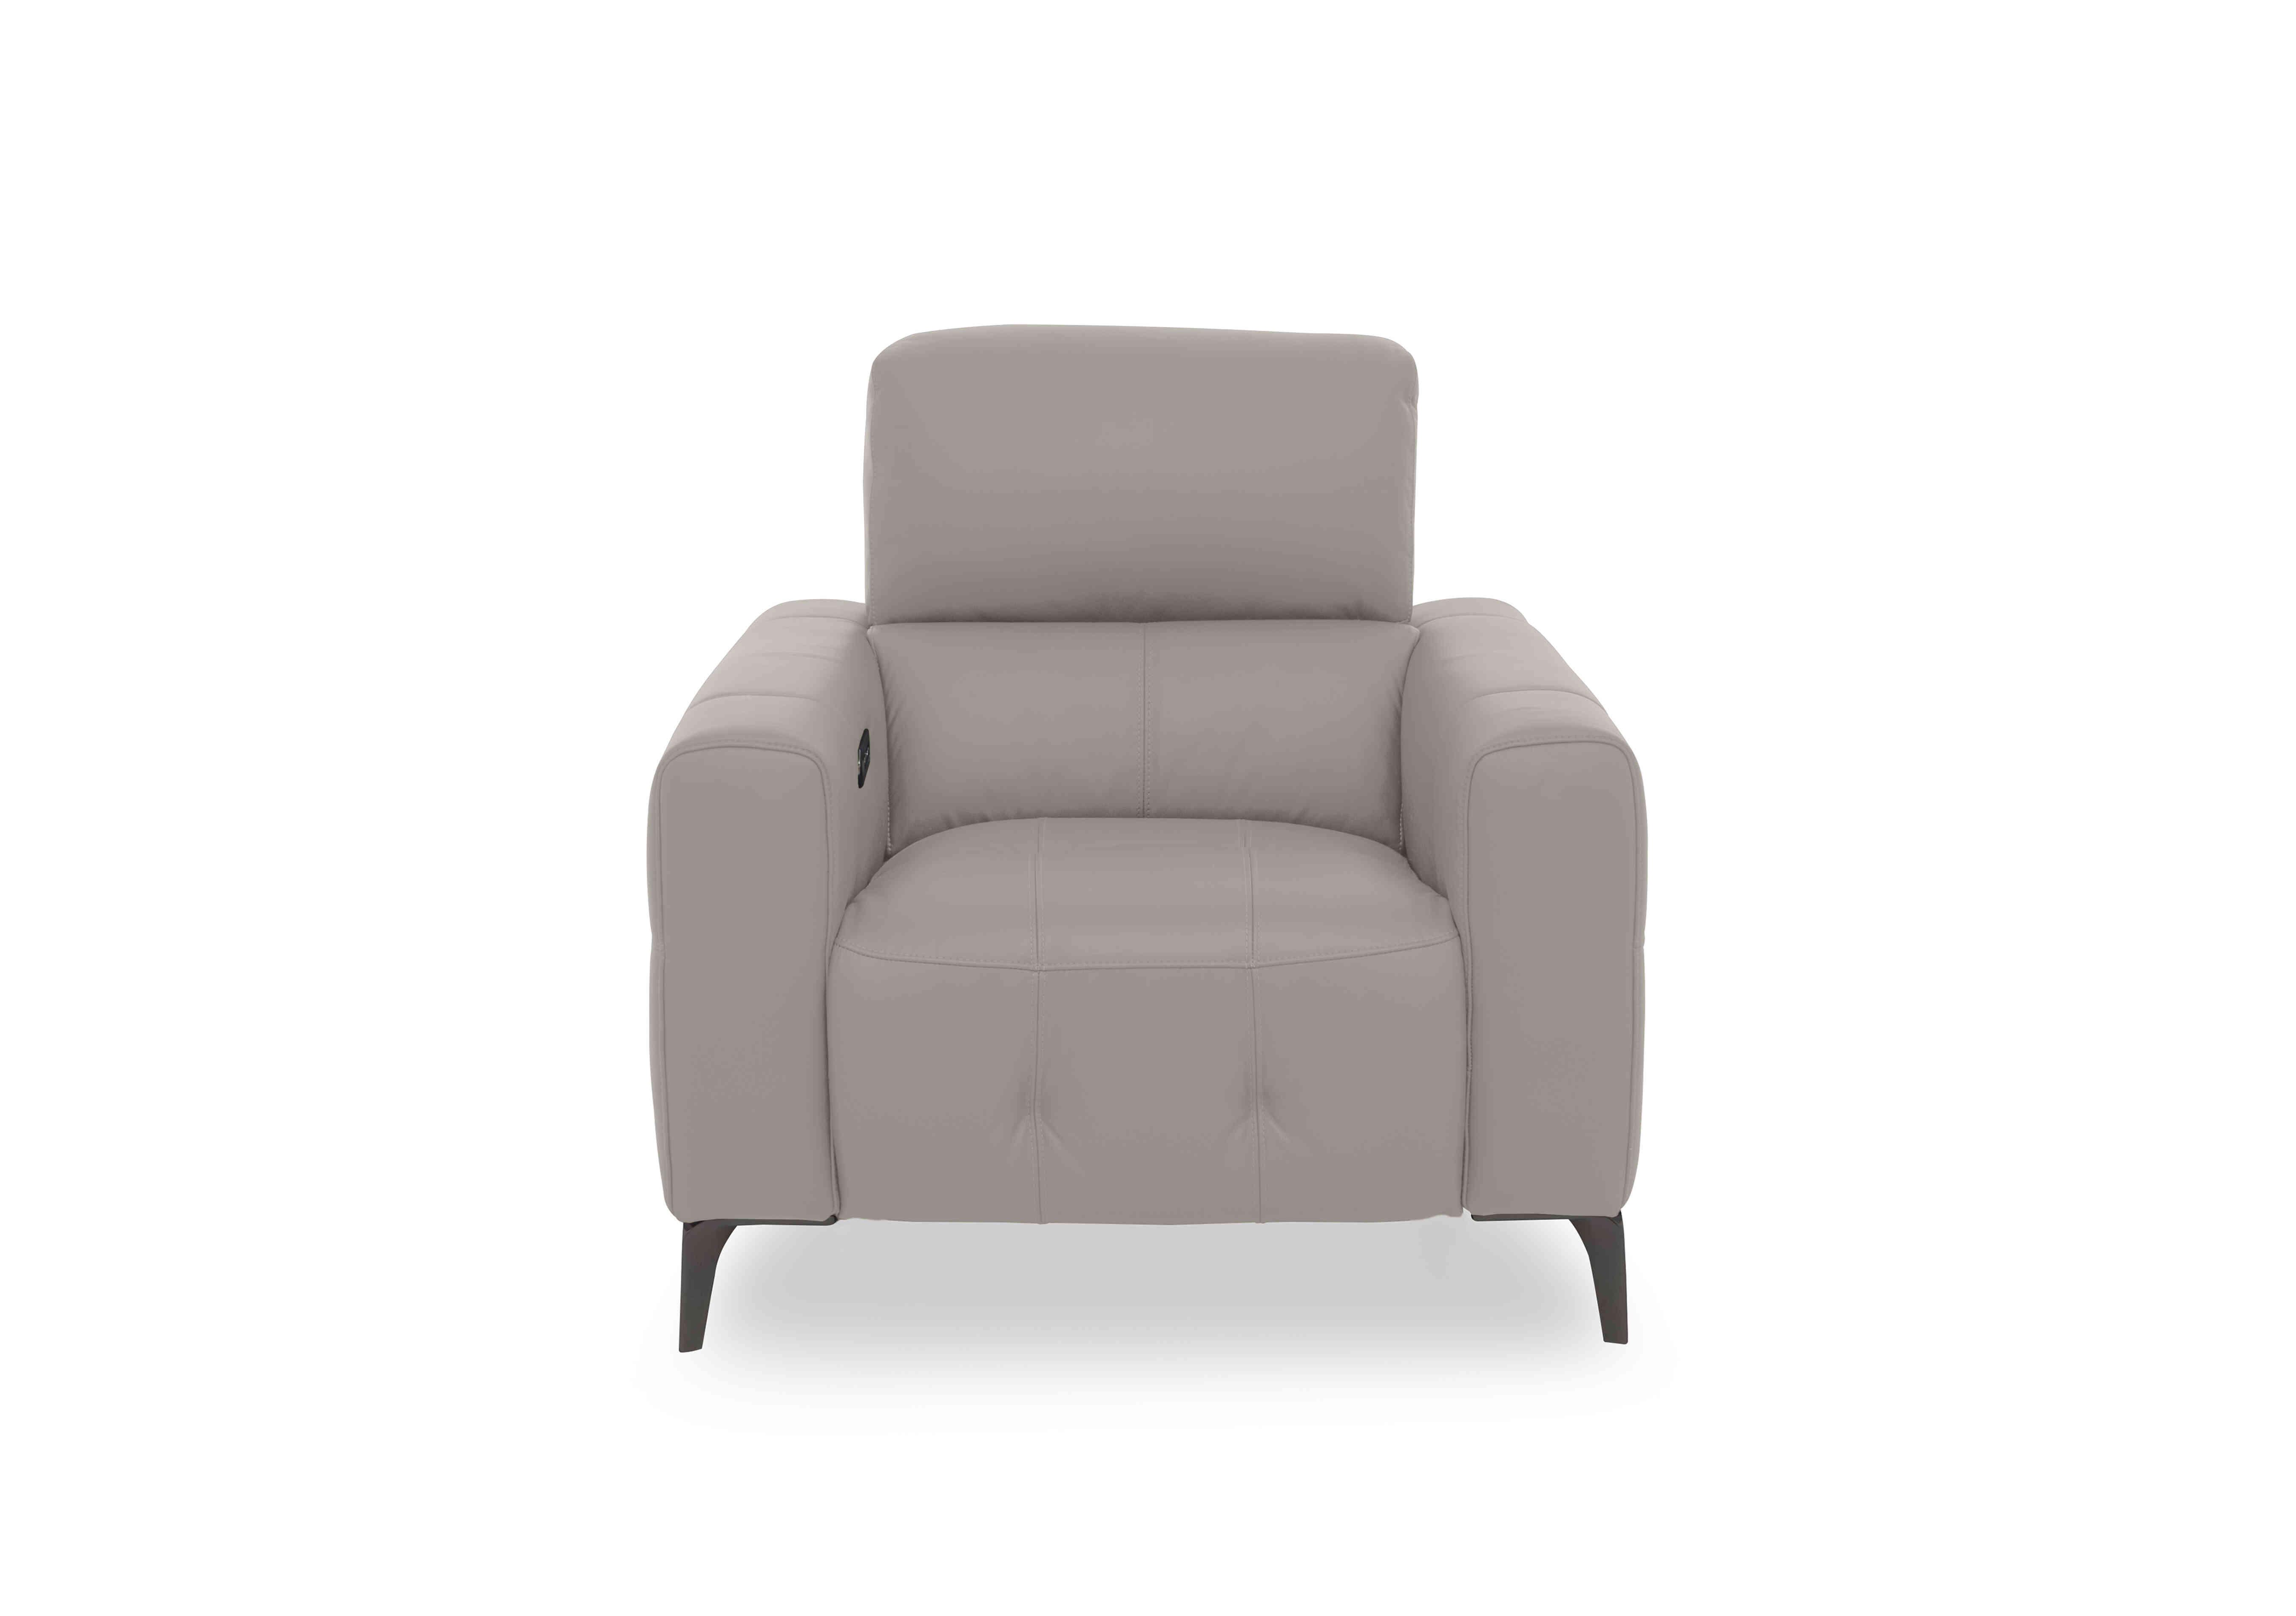 New York Leather Chair in Bv-946b Silver Grey on Furniture Village